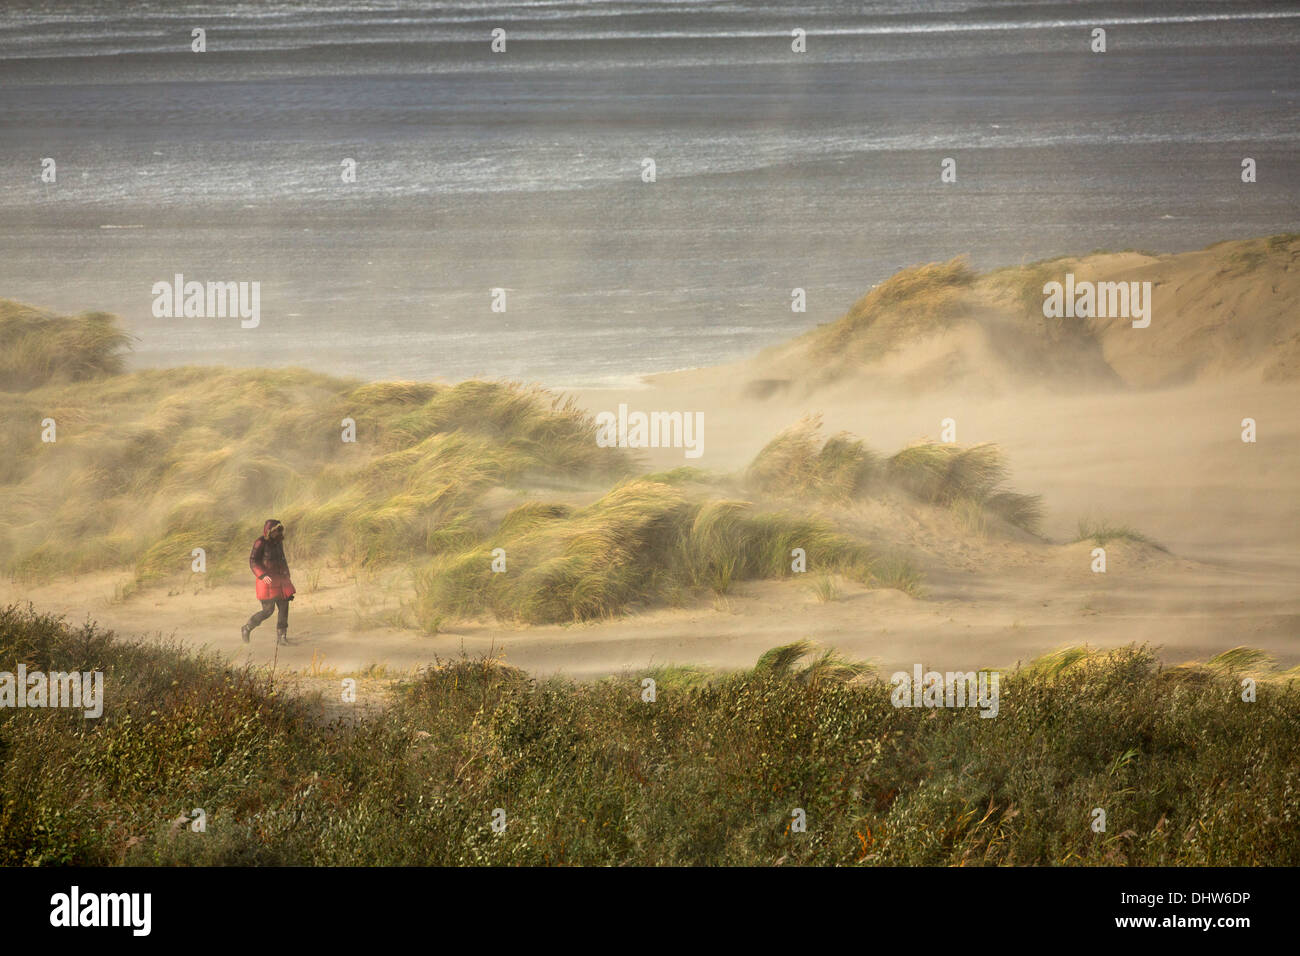 Netherlands, IJmuiden, Heavy stoL on North Sea. Strong wind and blowing sand. Beach grass. Woman tries to remain upright Stock Photo